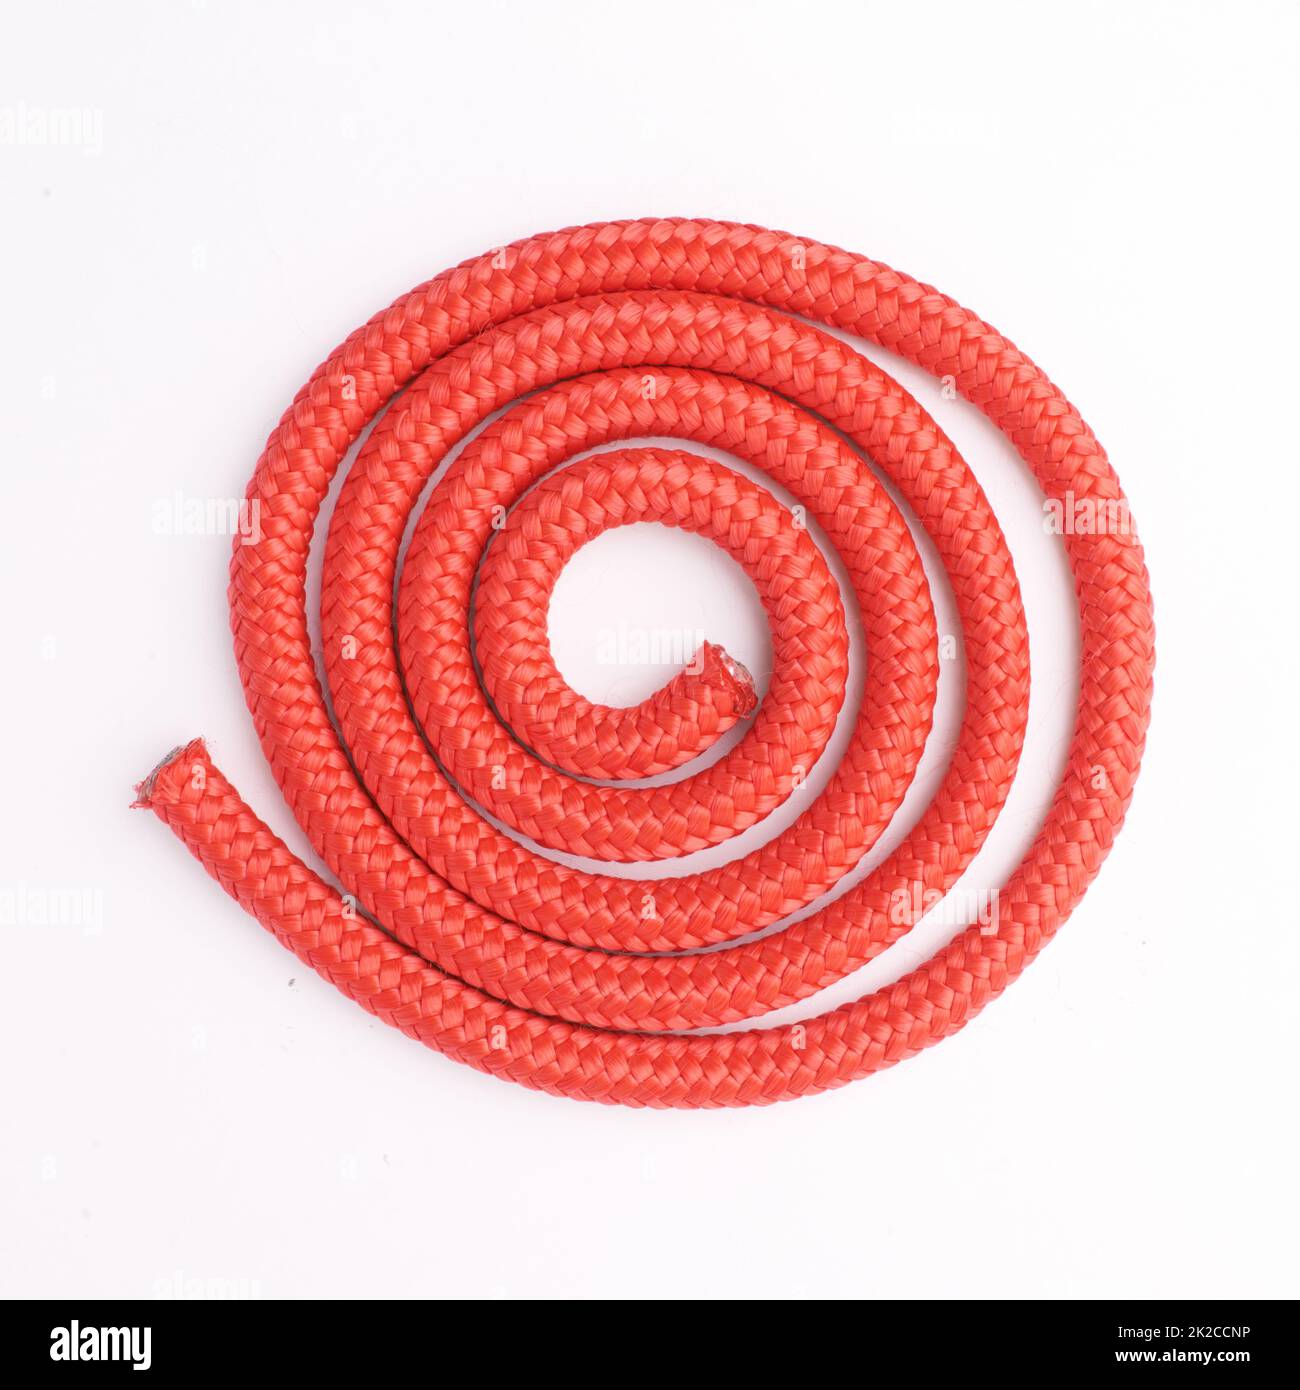 Tying things together. Studio shot of a coiled rope. Stock Photo